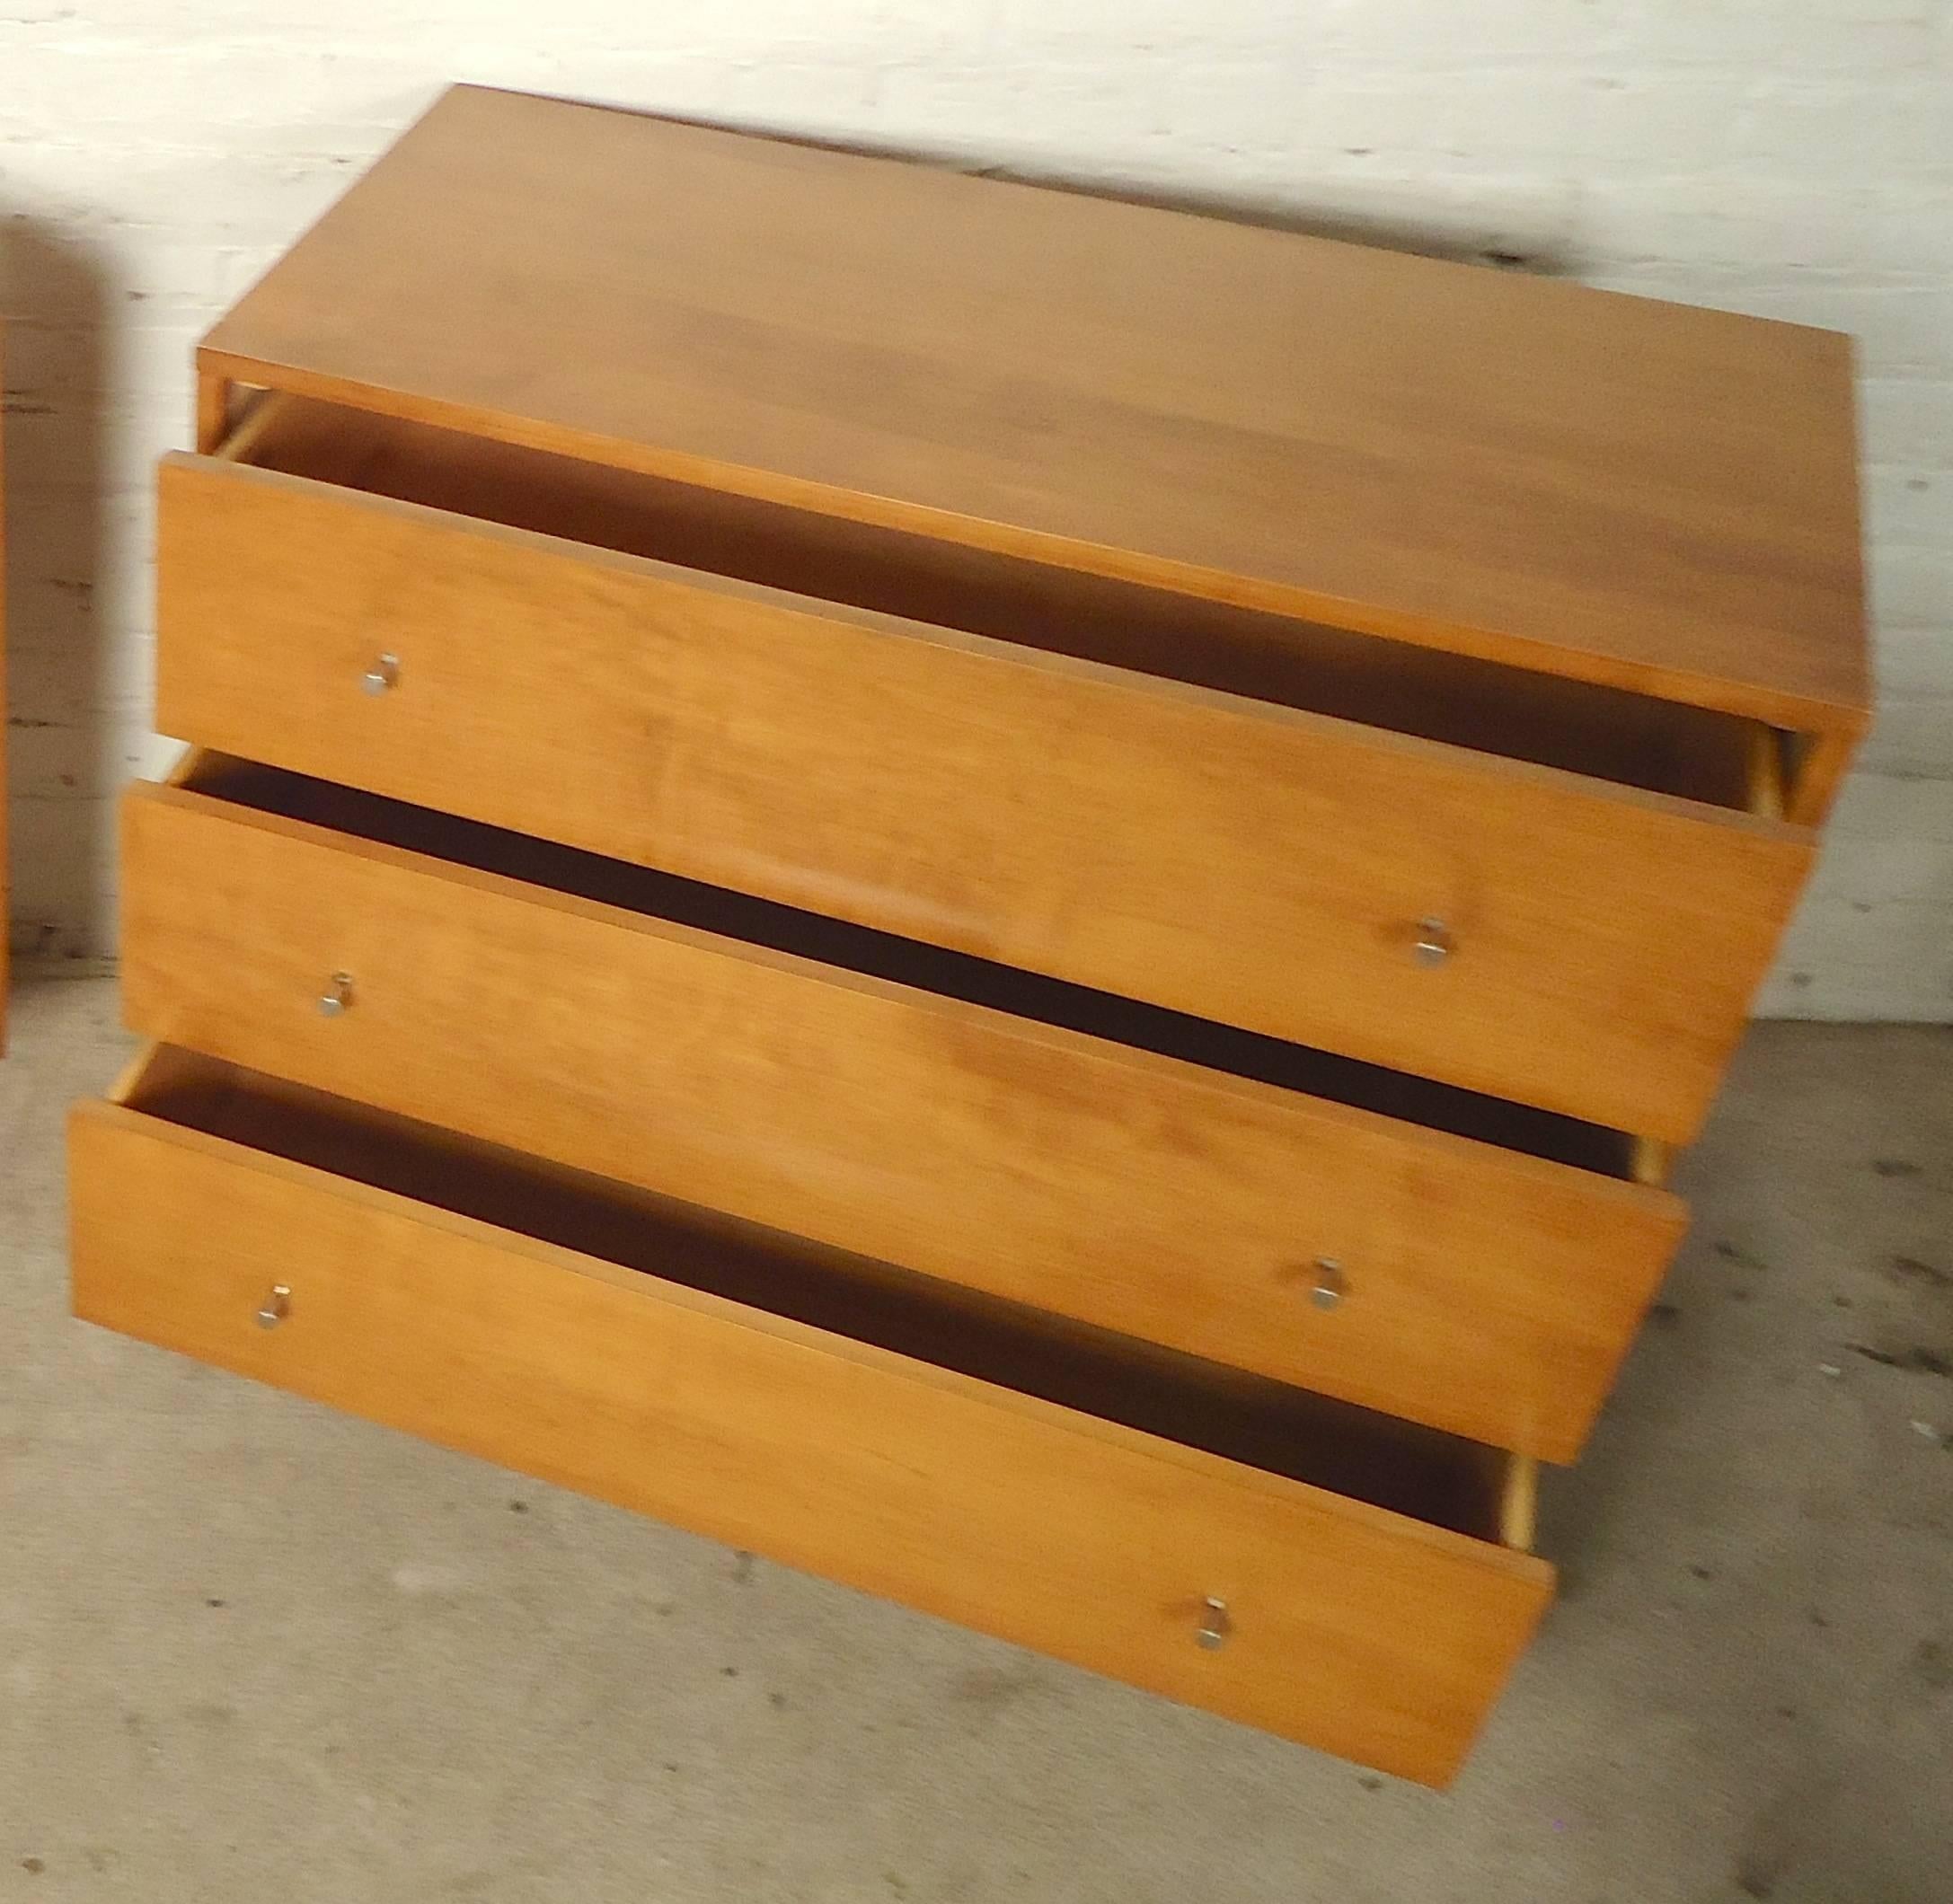 Paul McCobb designed furniture with blonde maple wood grain, classic cone legs and golf tee drawer pulls. 

(Please confirm item location - NY or NJ - with dealer).
